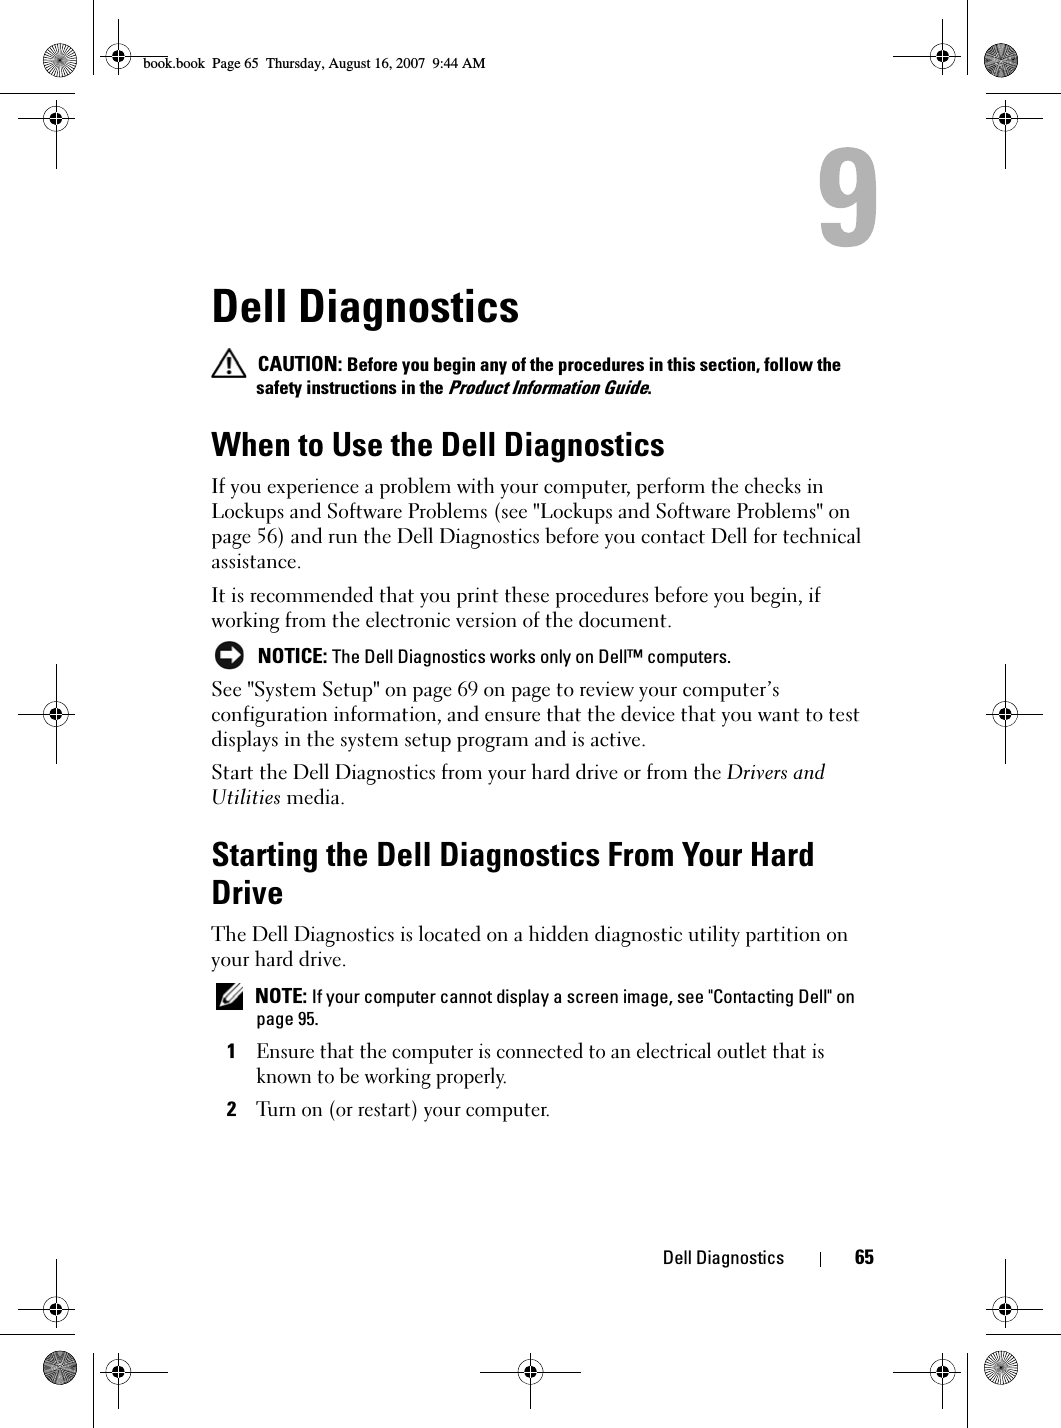 Dell Diagnostics 65Dell Diagnostics CAUTION: Before you begin any of the procedures in this section, follow the safety instructions in the Product Information Guide.When to Use the Dell DiagnosticsIf you experience a problem with your computer, perform the checks in Lockups and Software Problems (see &quot;Lockups and Software Problems&quot; on page 56) and run the Dell Diagnostics before you contact Dell for technical assistance.It is recommended that you print these procedures before you begin, if working from the electronic version of the document. NOTICE: The Dell Diagnostics works only on Dell™ computers.See &quot;System Setup&quot; on page 69 on page to review your computer’s configuration information, and ensure that the device that you want to test displays in the system setup program and is active.Start the Dell Diagnostics from your hard drive or from the Drivers and Utilities media. Starting the Dell Diagnostics From Your Hard DriveThe Dell Diagnostics is located on a hidden diagnostic utility partition on your hard drive. NOTE: If your computer cannot display a screen image, see &quot;Contacting Dell&quot; on page 95.1Ensure that the computer is connected to an electrical outlet that is known to be working properly.2Turn on (or restart) your computer.book.book  Page 65  Thursday, August 16, 2007  9:44 AM